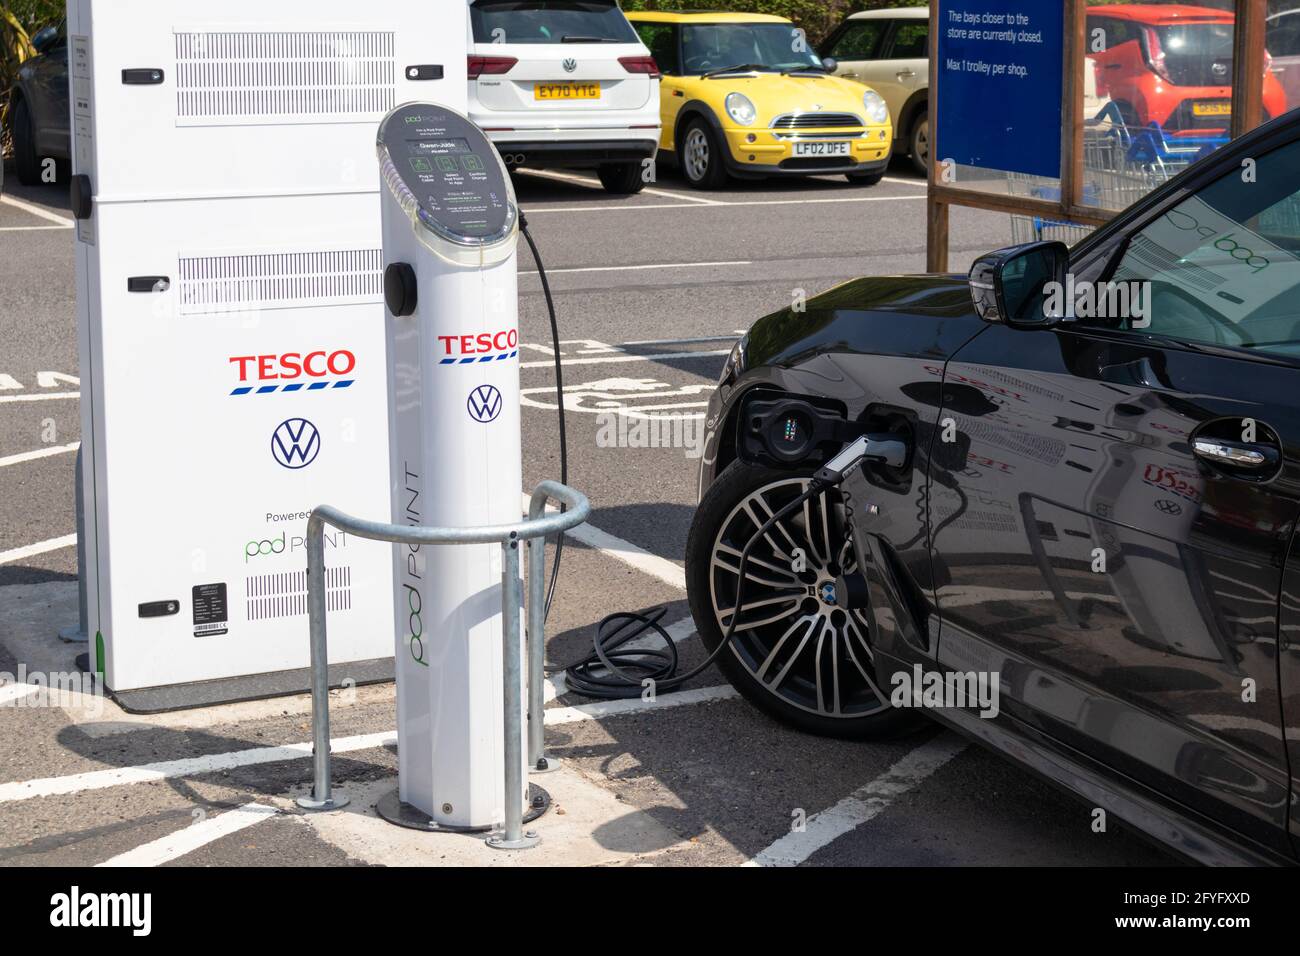 Tesco electric car charging station, powered by pod point, tenterden, kent, uk Stock Photo